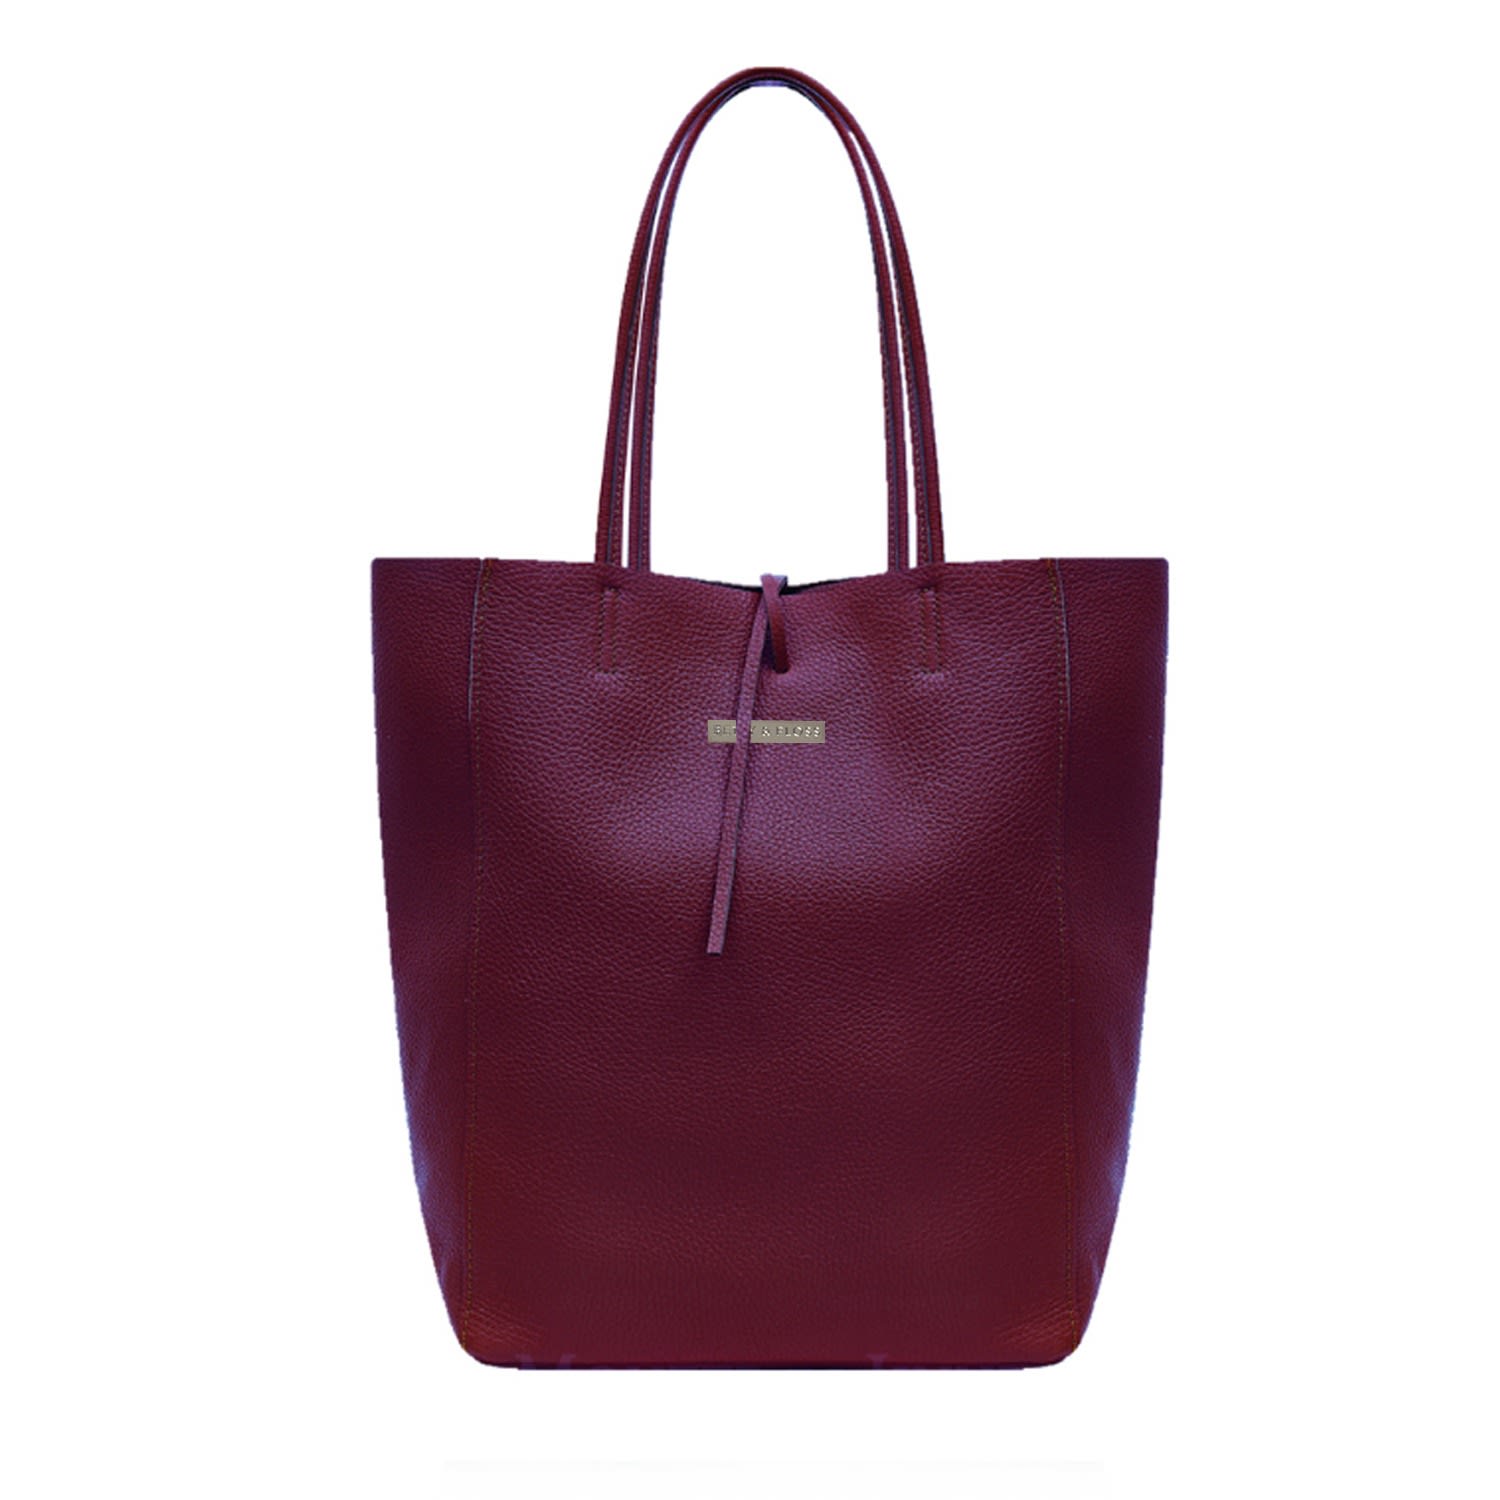 Women’s Pink / Purple Milan Soft Leather Tote Bag In Burgundy Silver Hardware Betsy & Floss